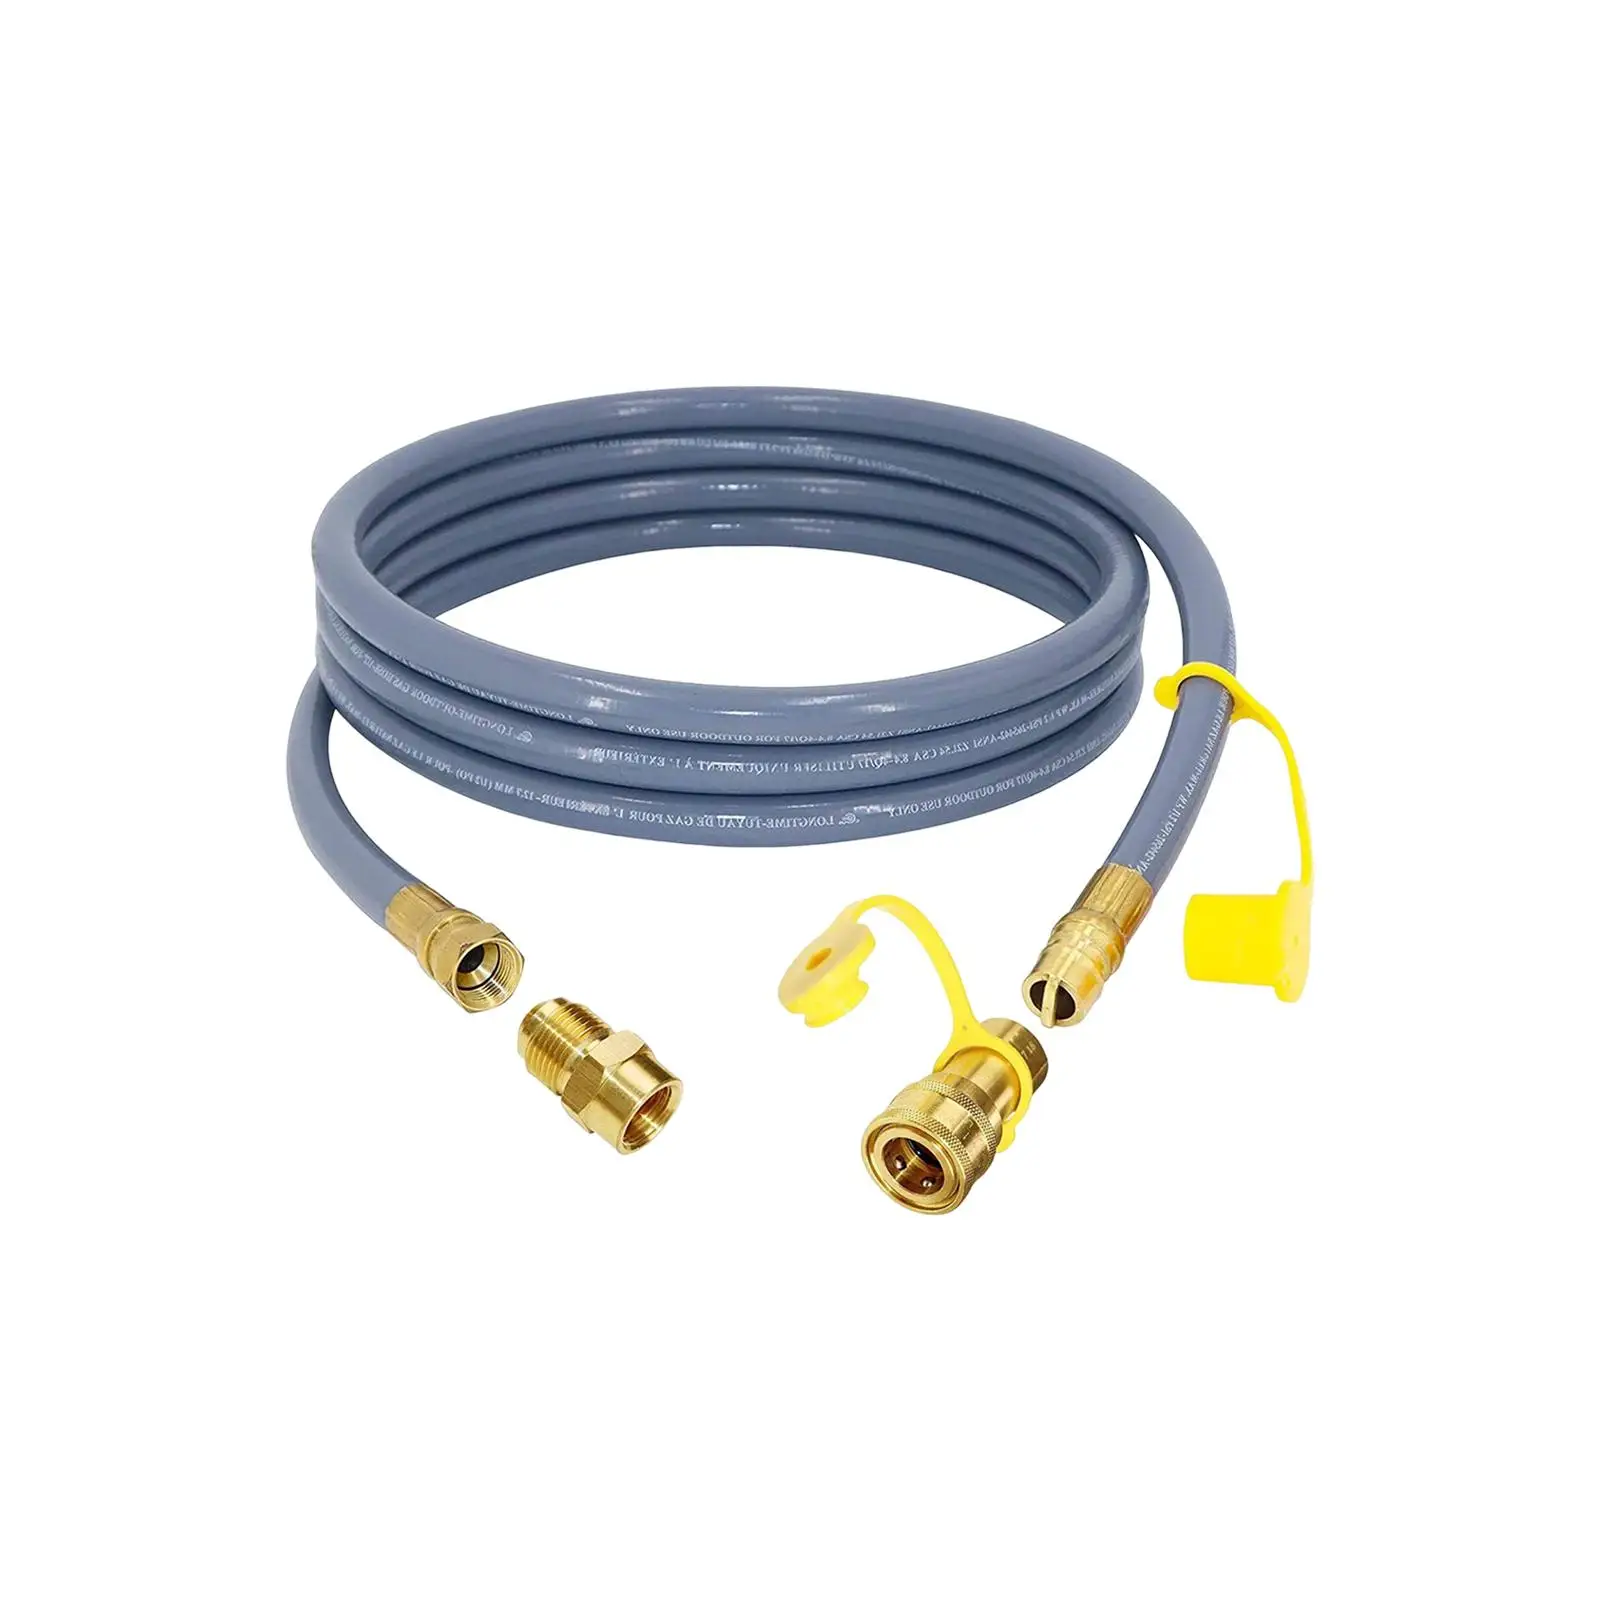 3Meter 1/2 inch Natural Gas Hose with Quick Connect Fitting Gas Line Propane Quick Connect Hose for Low Pressure BBQ Pizza Oven